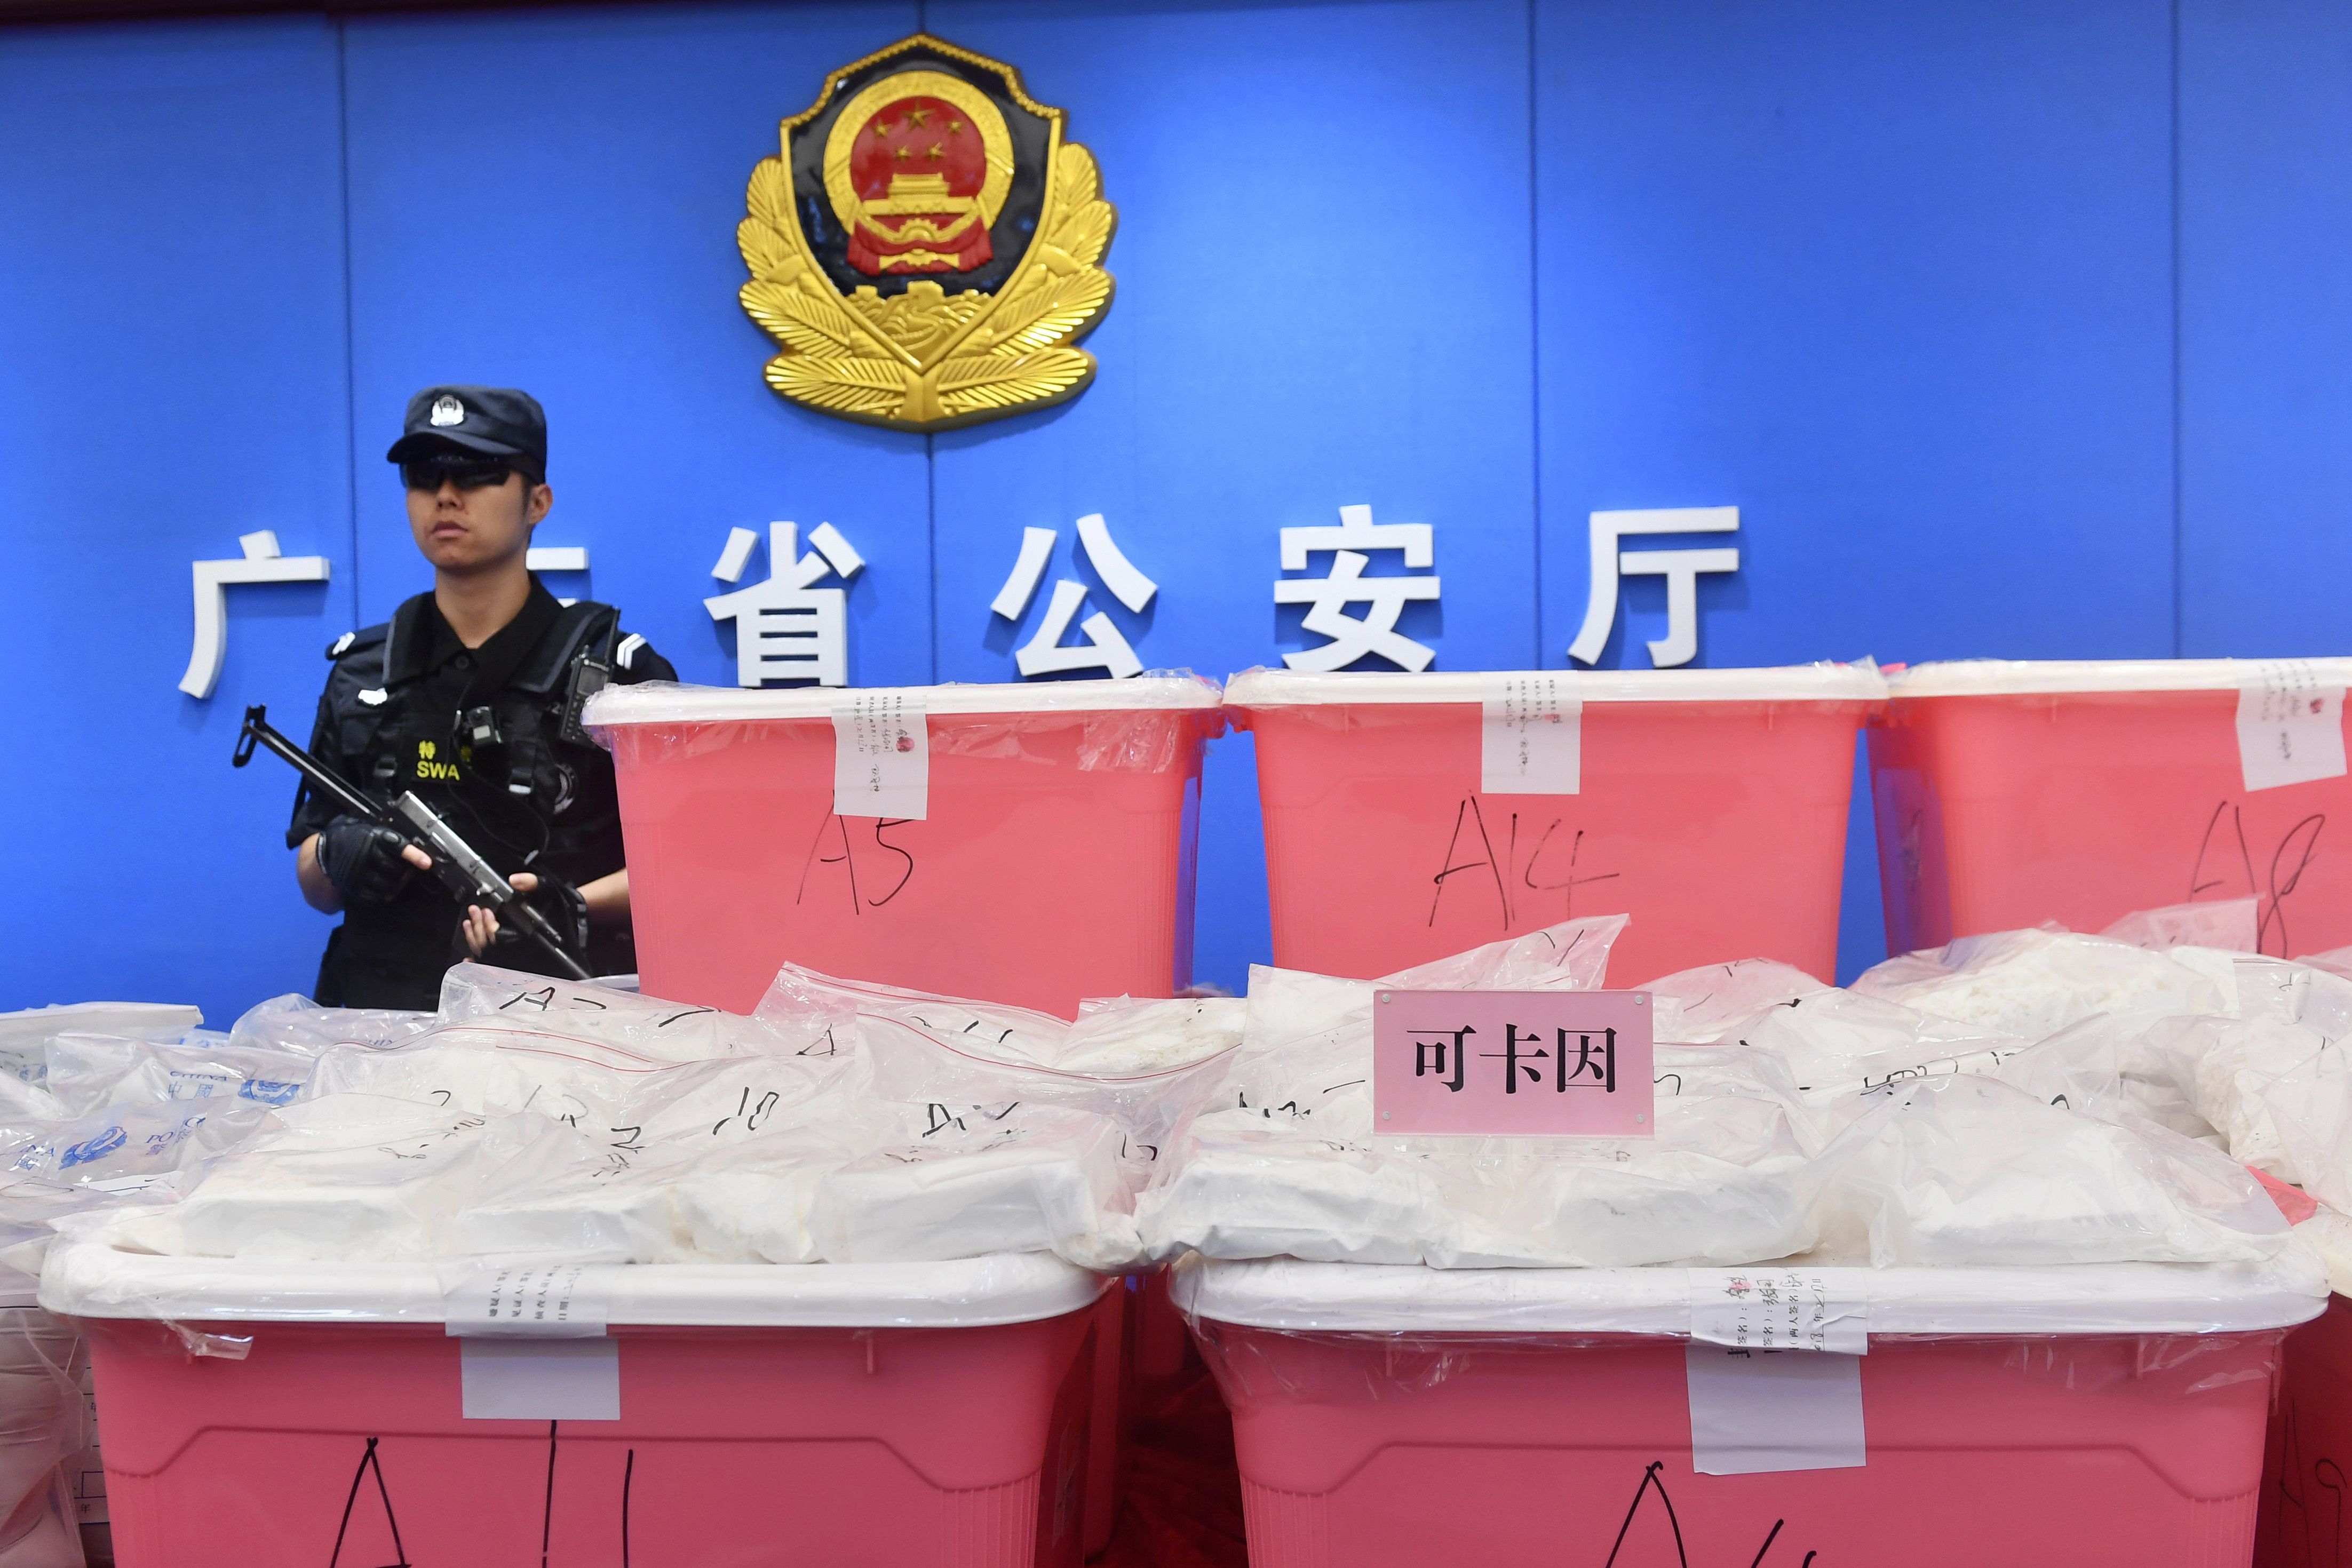 A policeman stands guard next to bags of cocaine seized in Guangzhou in China's southern Guangdong province on April 24, 2018. (-&mdash;AFP/Getty Images)